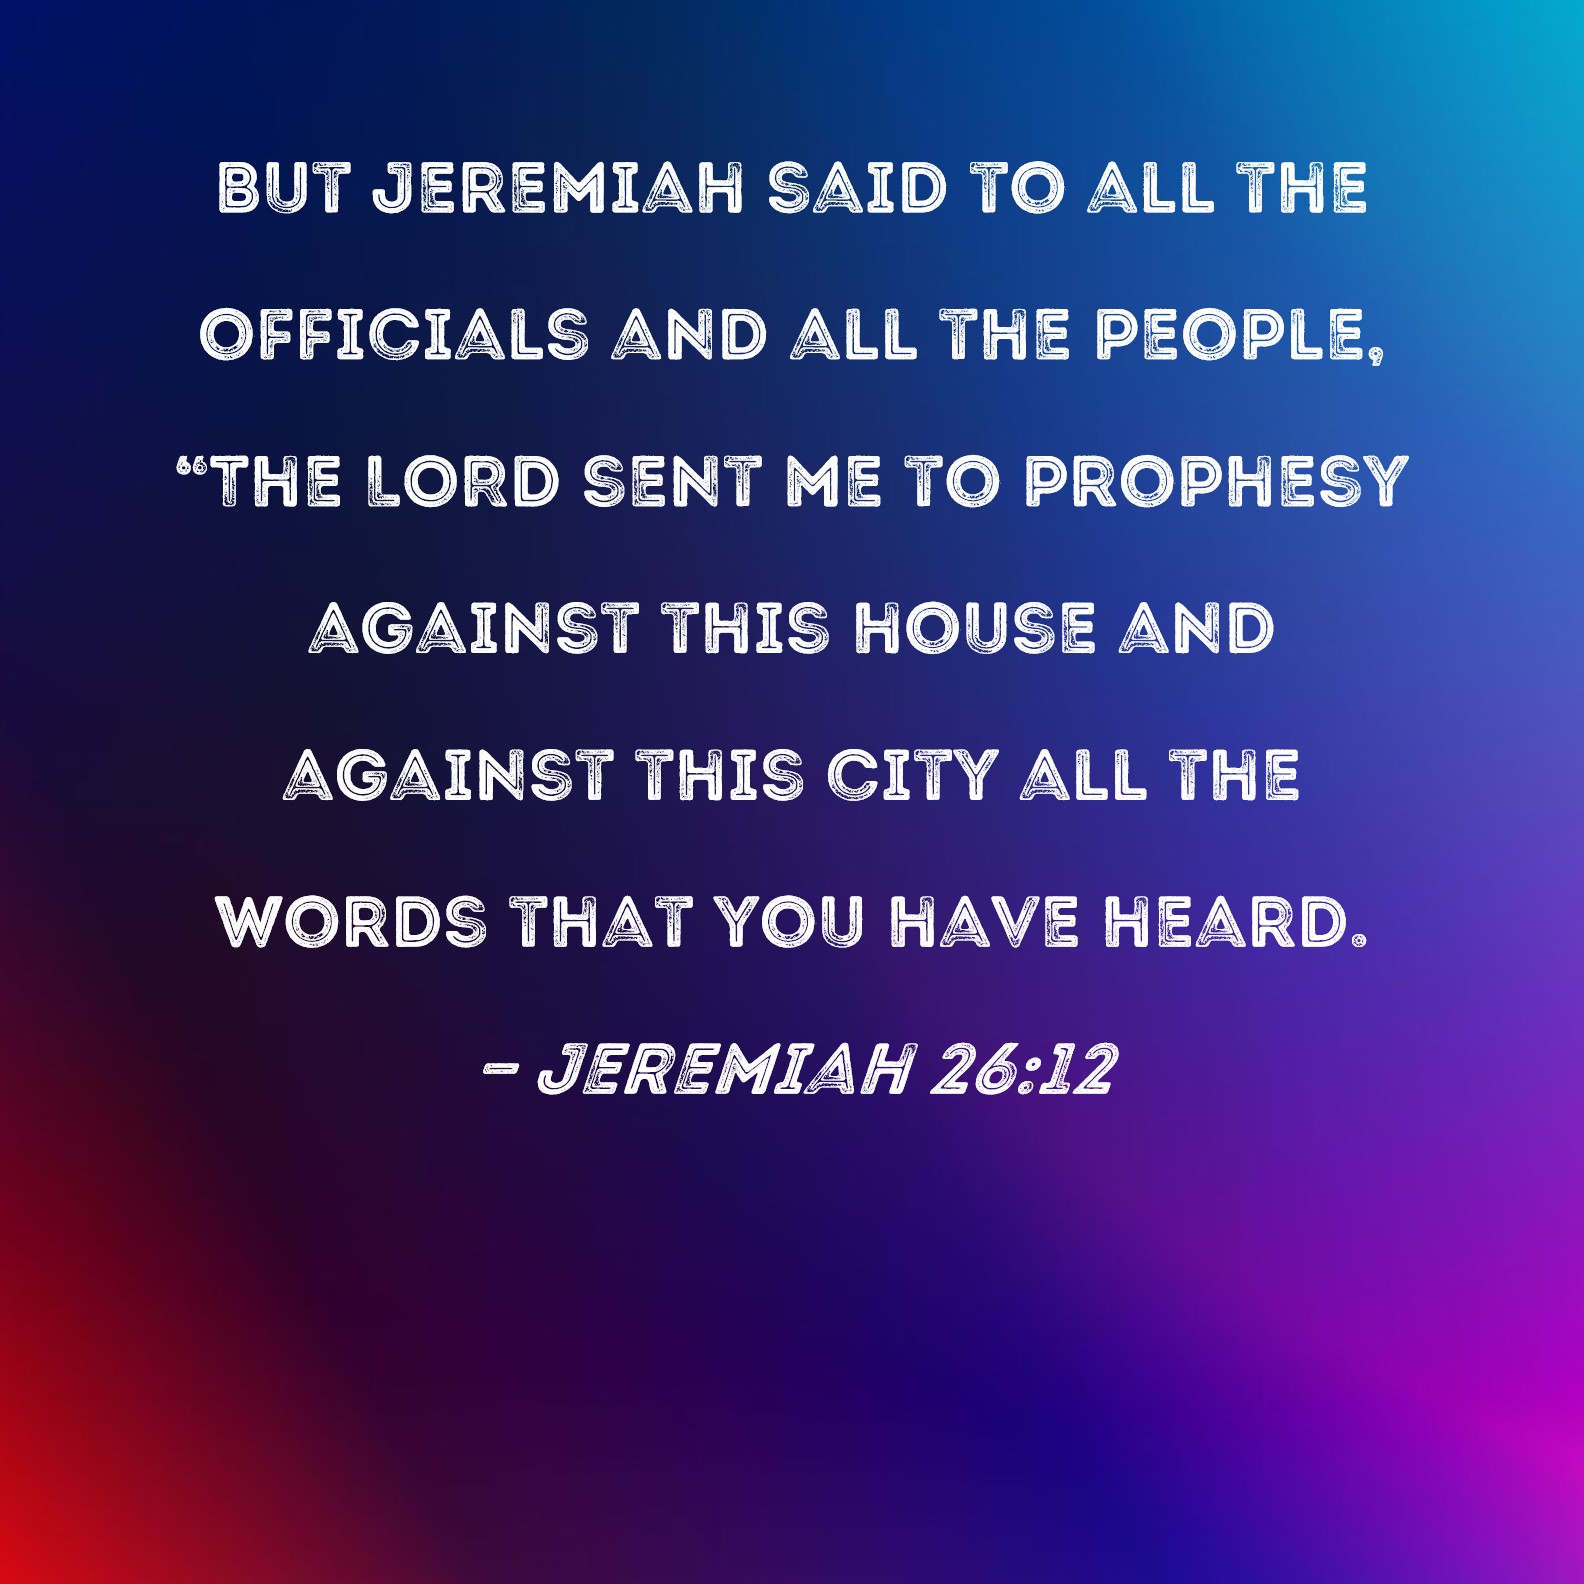 Jeremiah 2612 But Jeremiah said to all the officials and all the